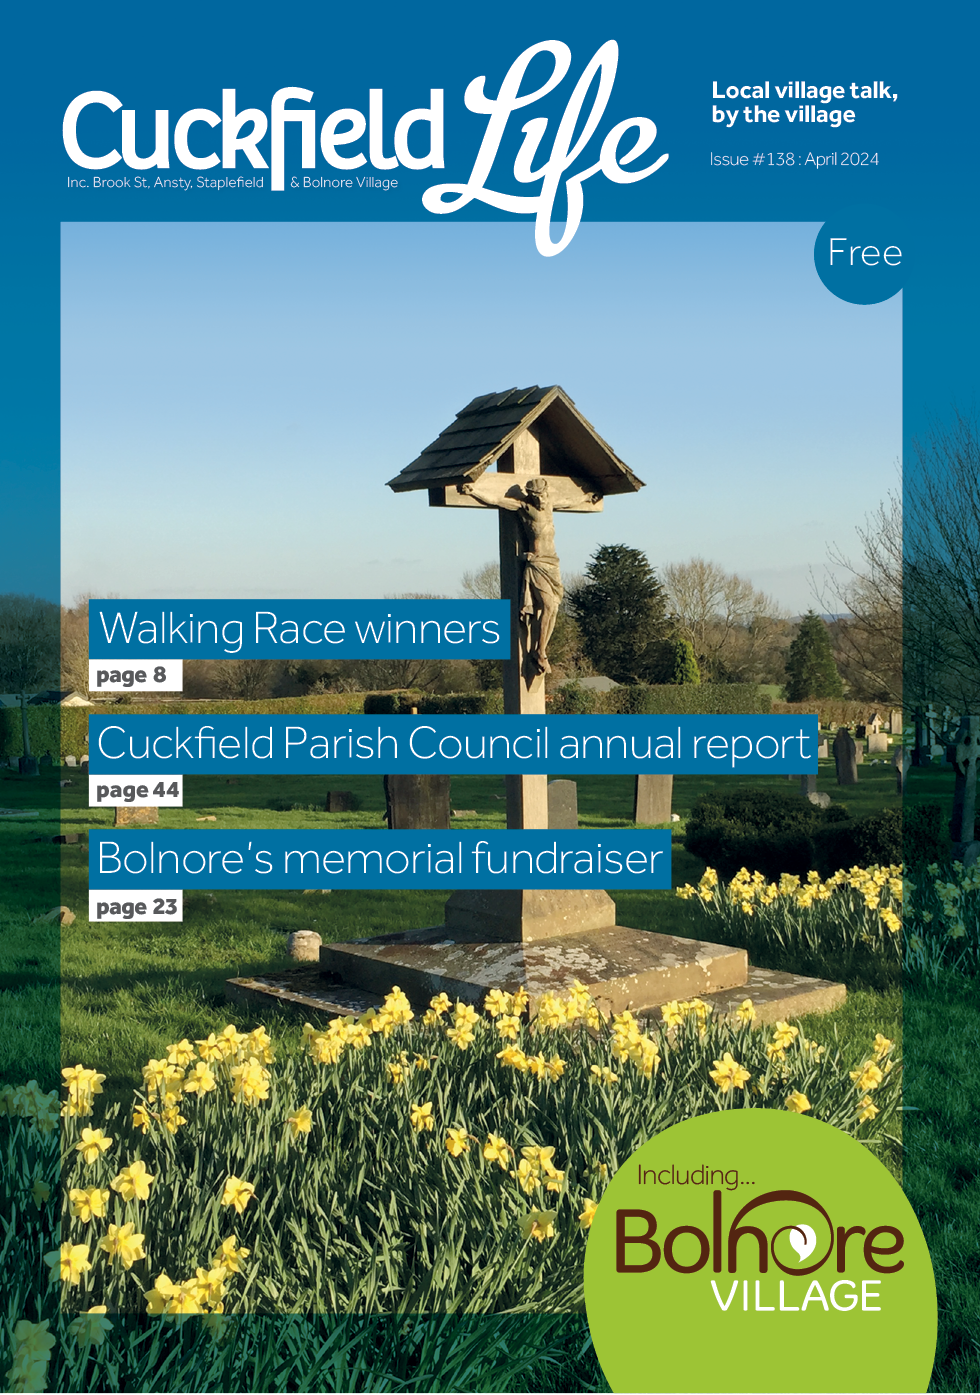 Cuckfield Life - the community magazine for the village of